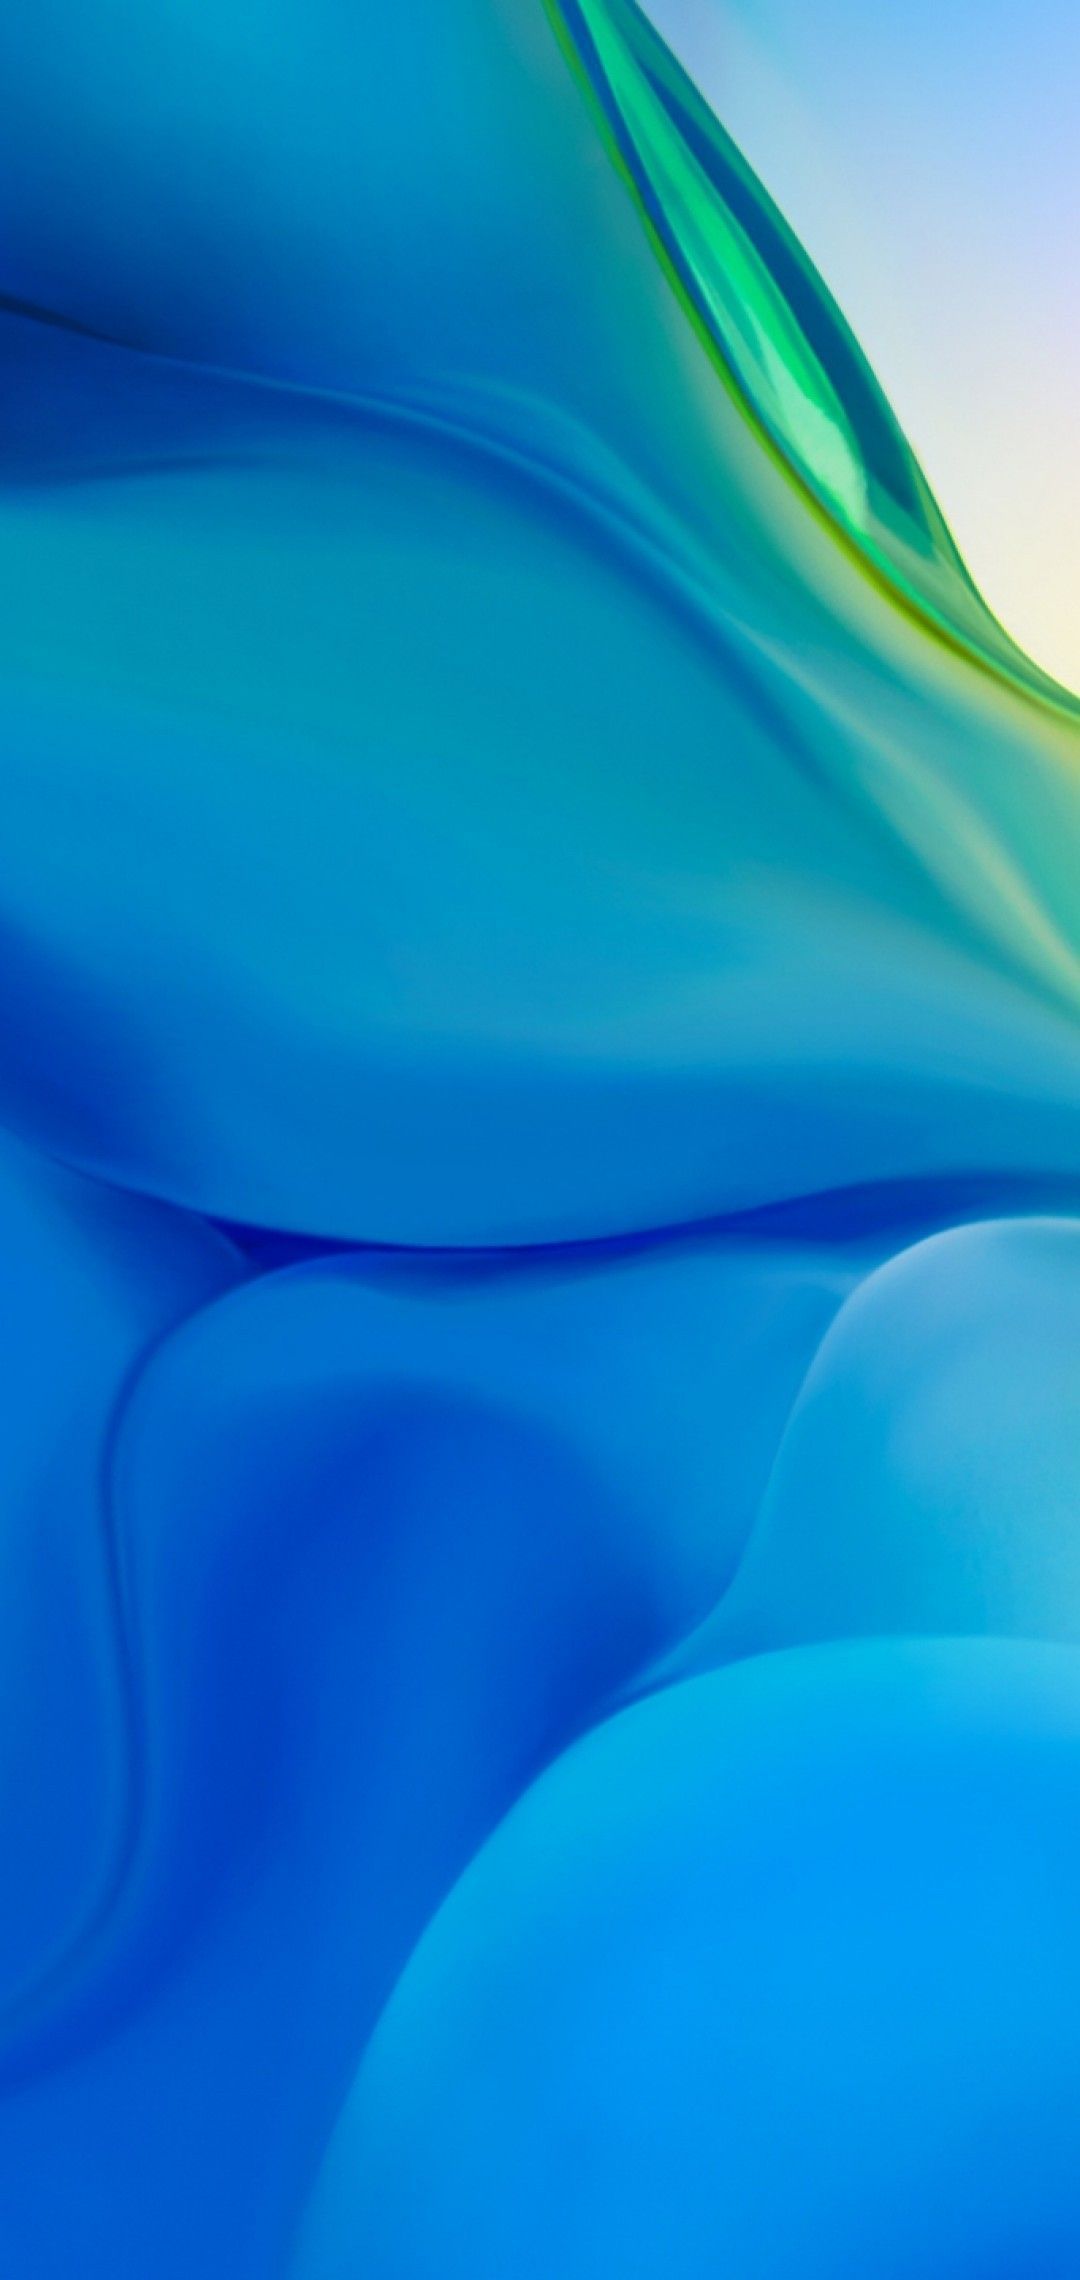 ✓[30+] Download 1080x2280 Huawei P30 Pro Stock, Blue Waves - Android /  iPhone HD Wallpaper Background Download (png / jpg) (2023)